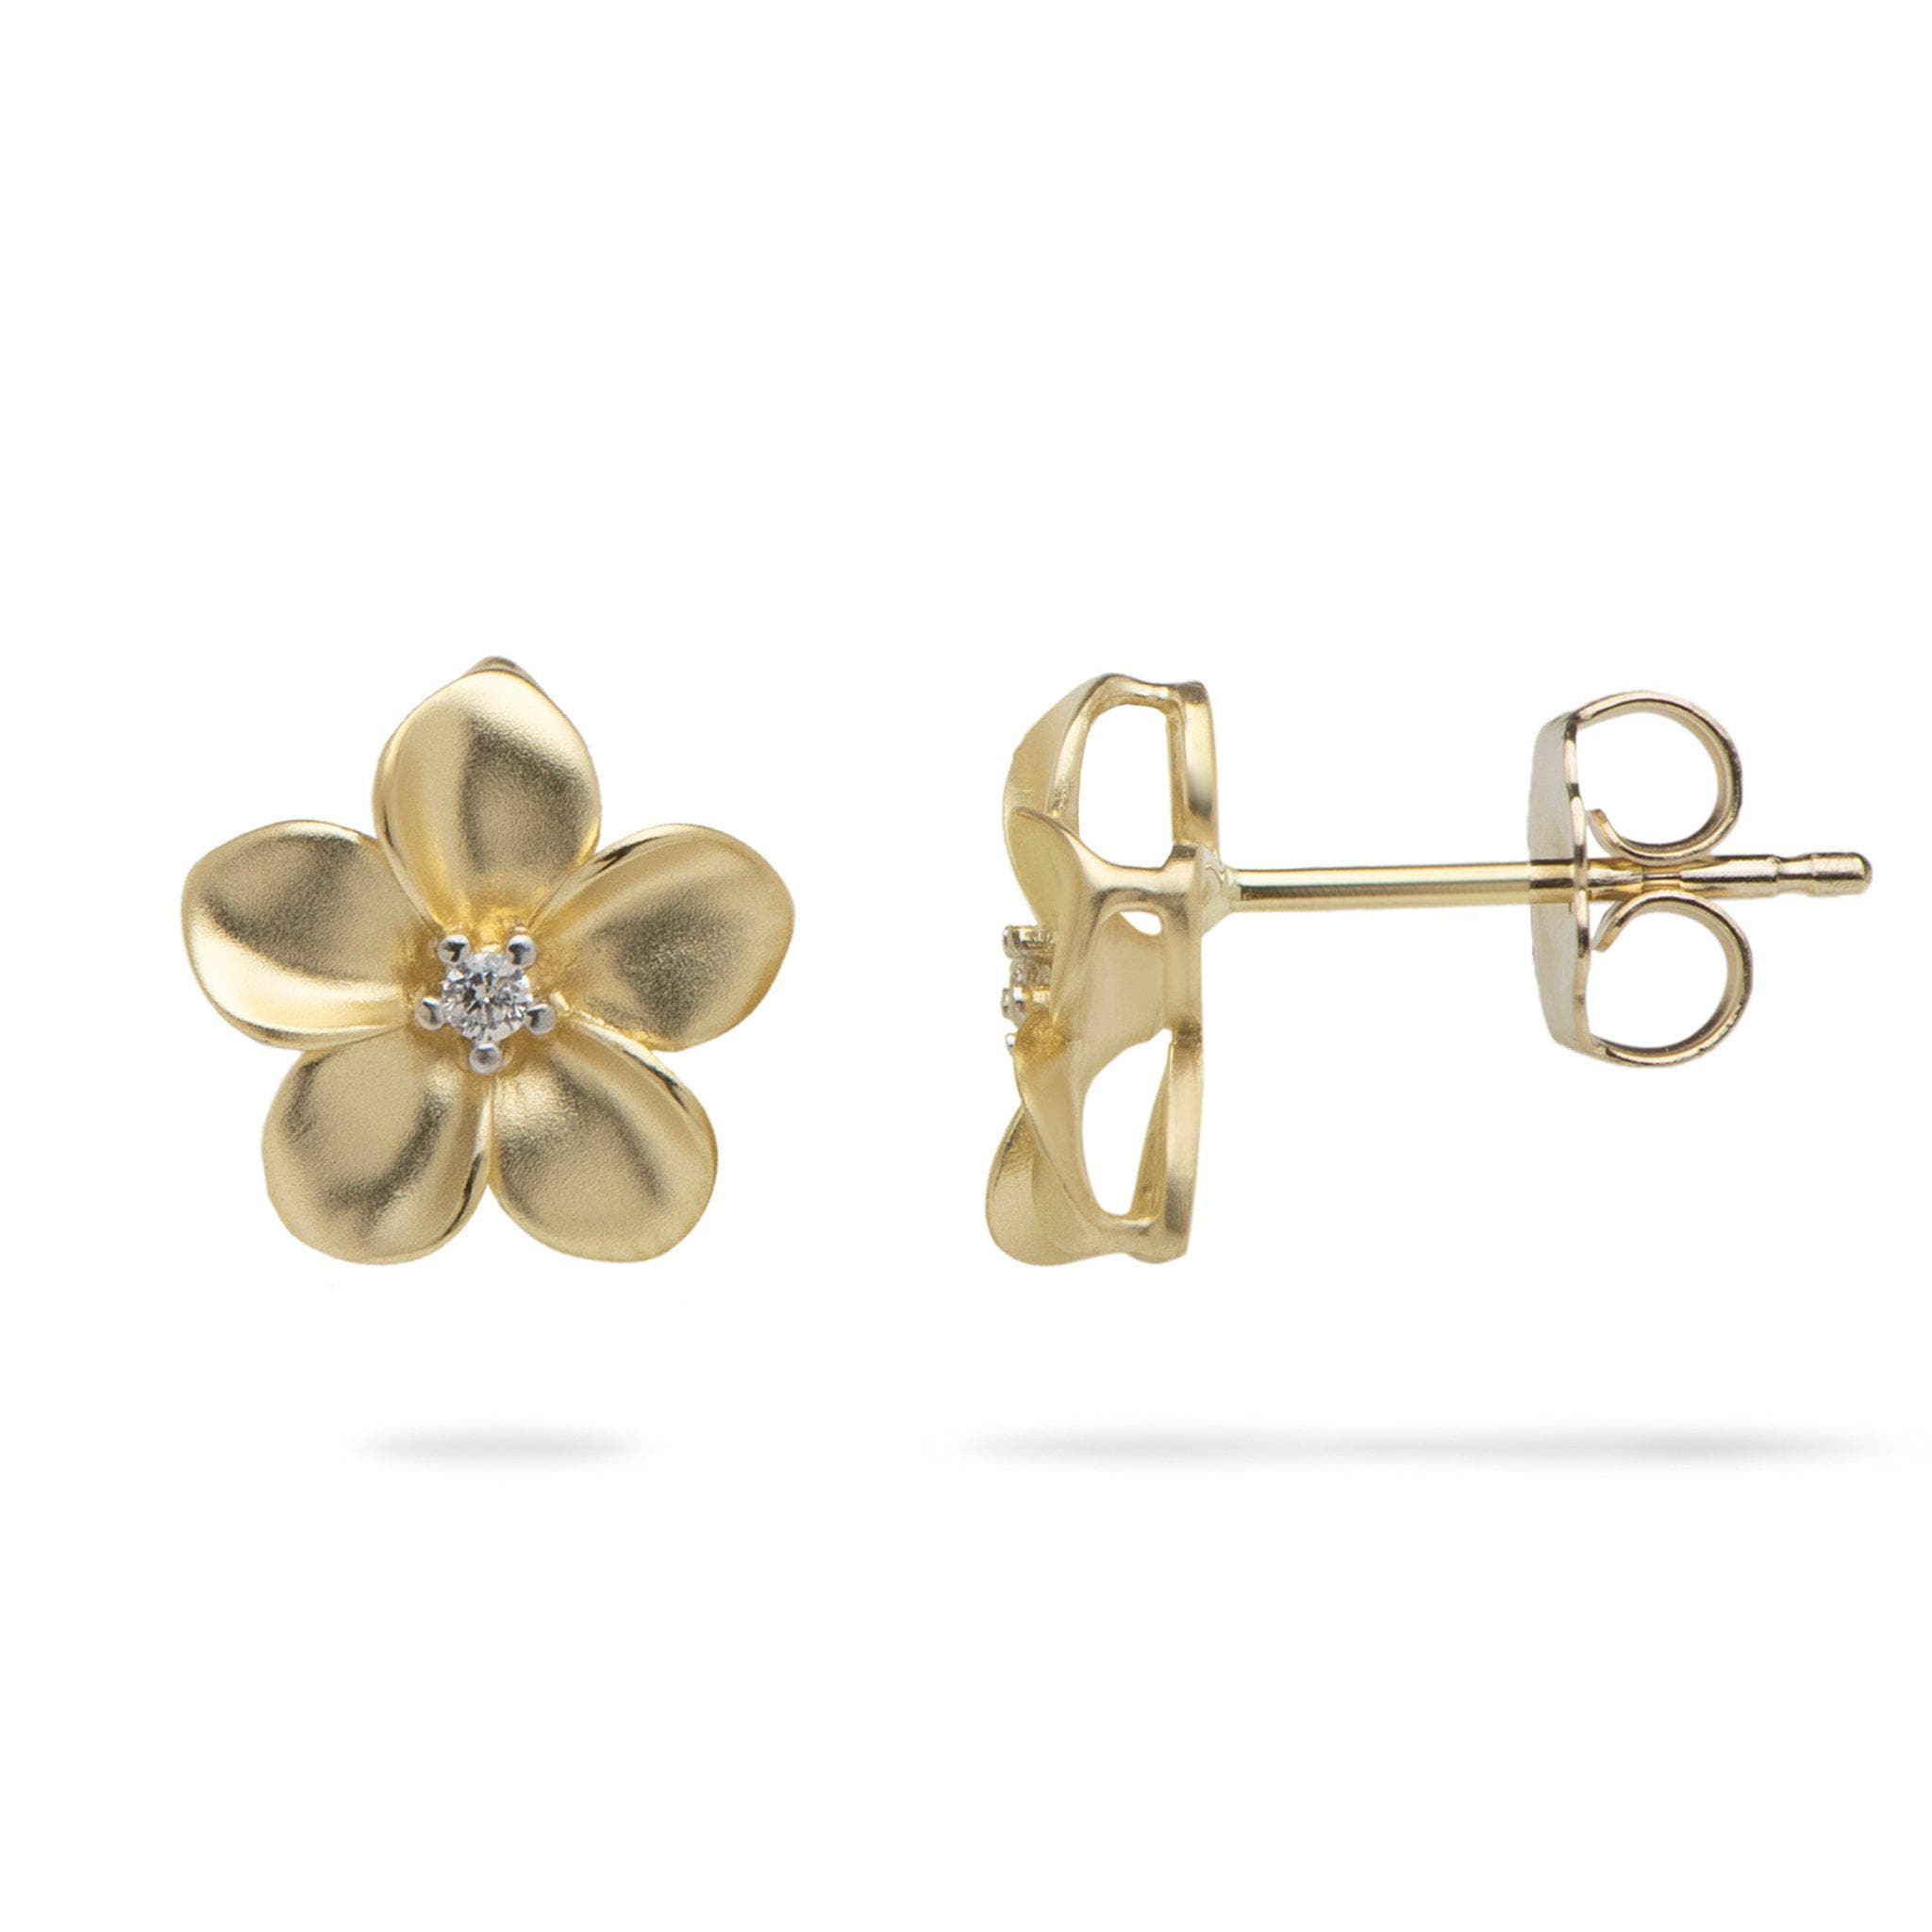 Plumeria Earrings in Gold with Diamonds - 11mm – Maui Divers Jewelry